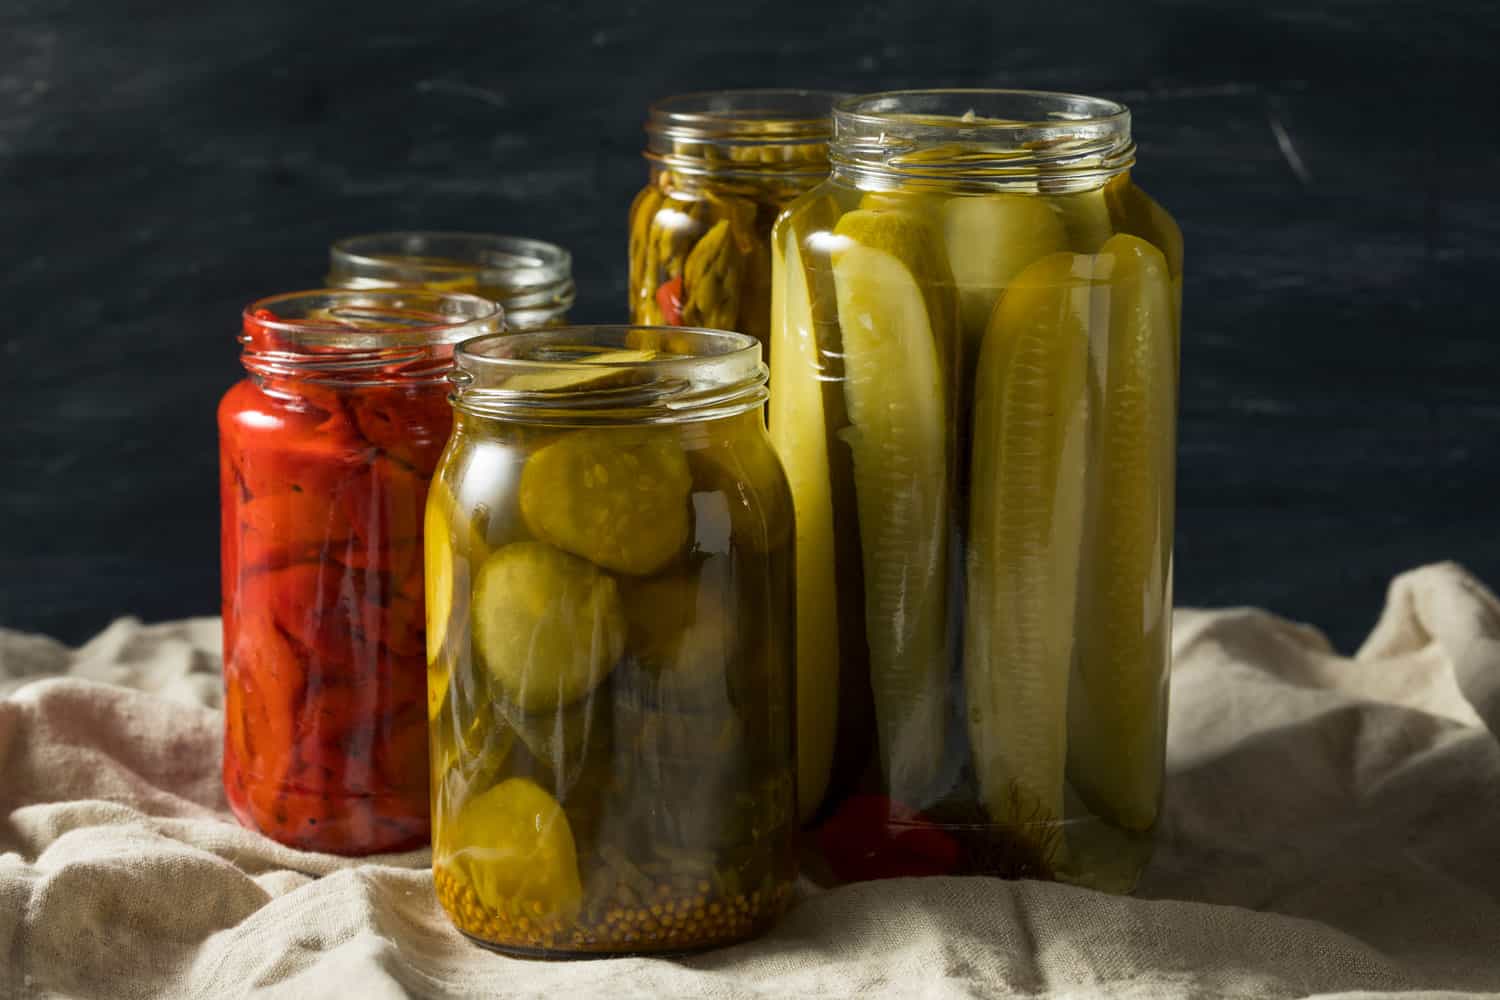 Jars filled with pickles on the table